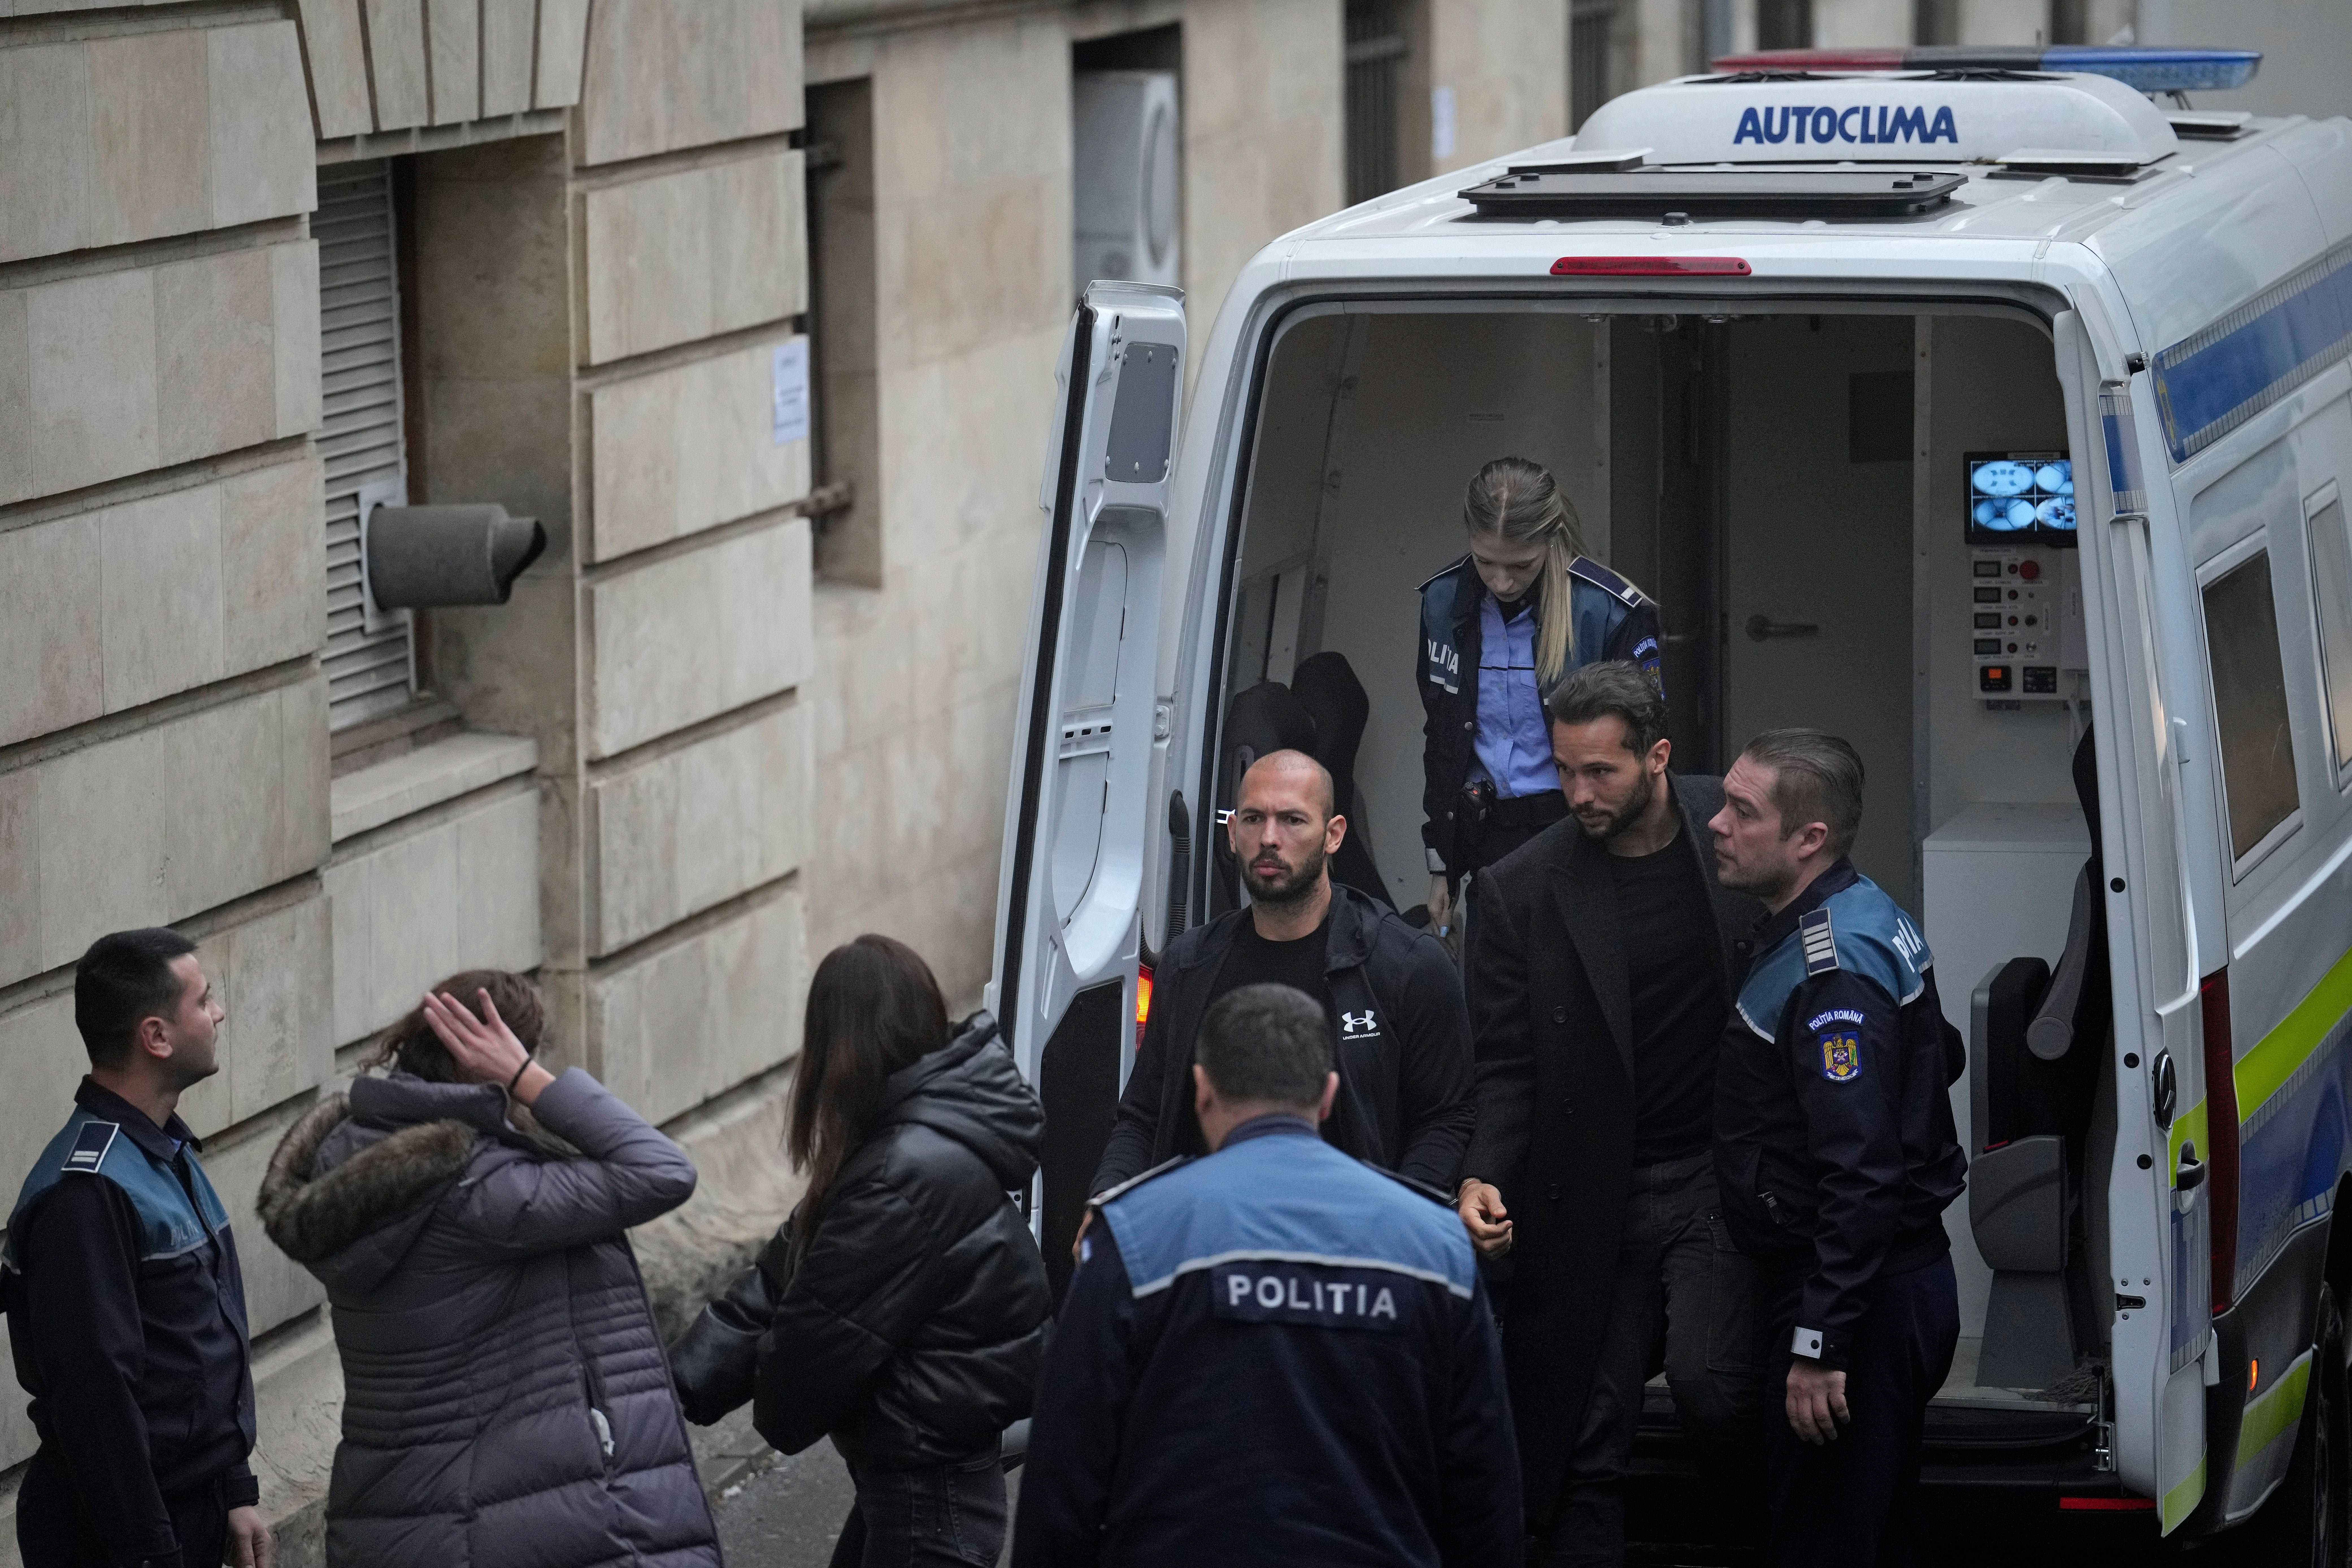 The Tates arrived at court in Bucharest, Romania on Tuesday morning